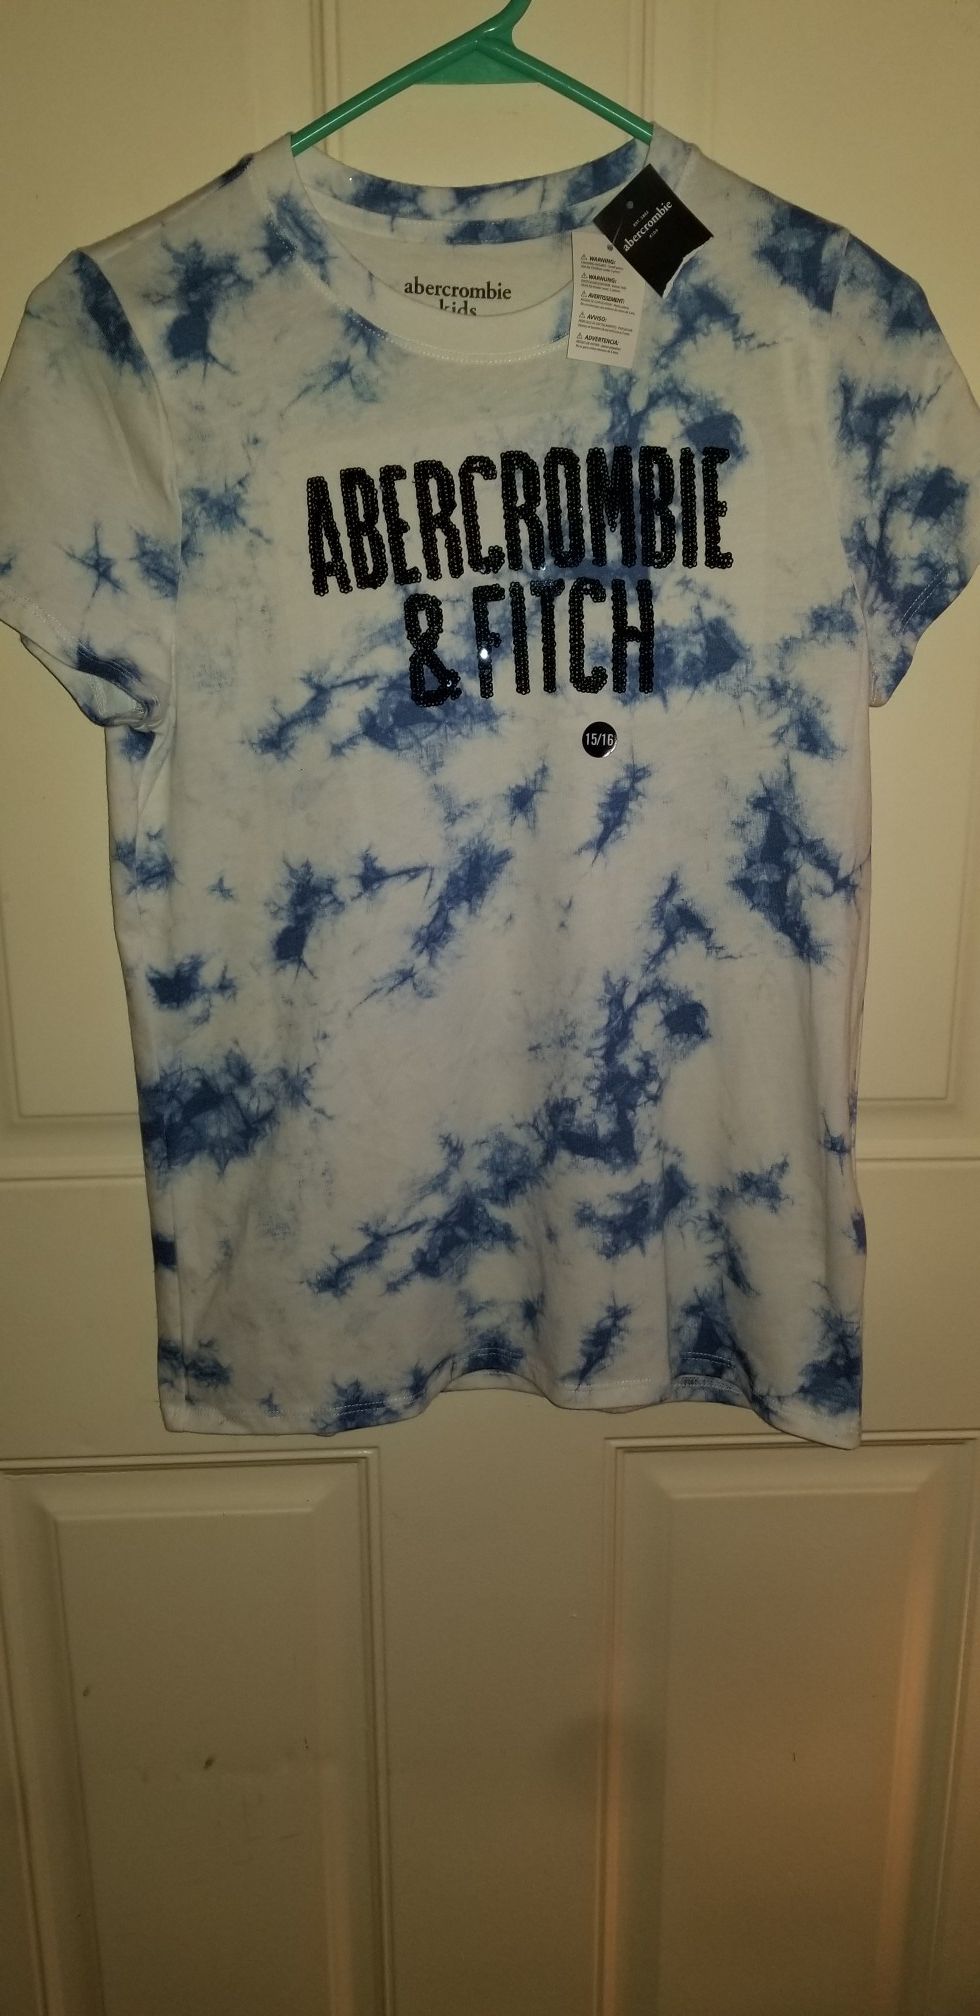 Abercrombie & Fitch BRAND NEW With Tags SIZE 15/16 Shirt Pick up in Taylor